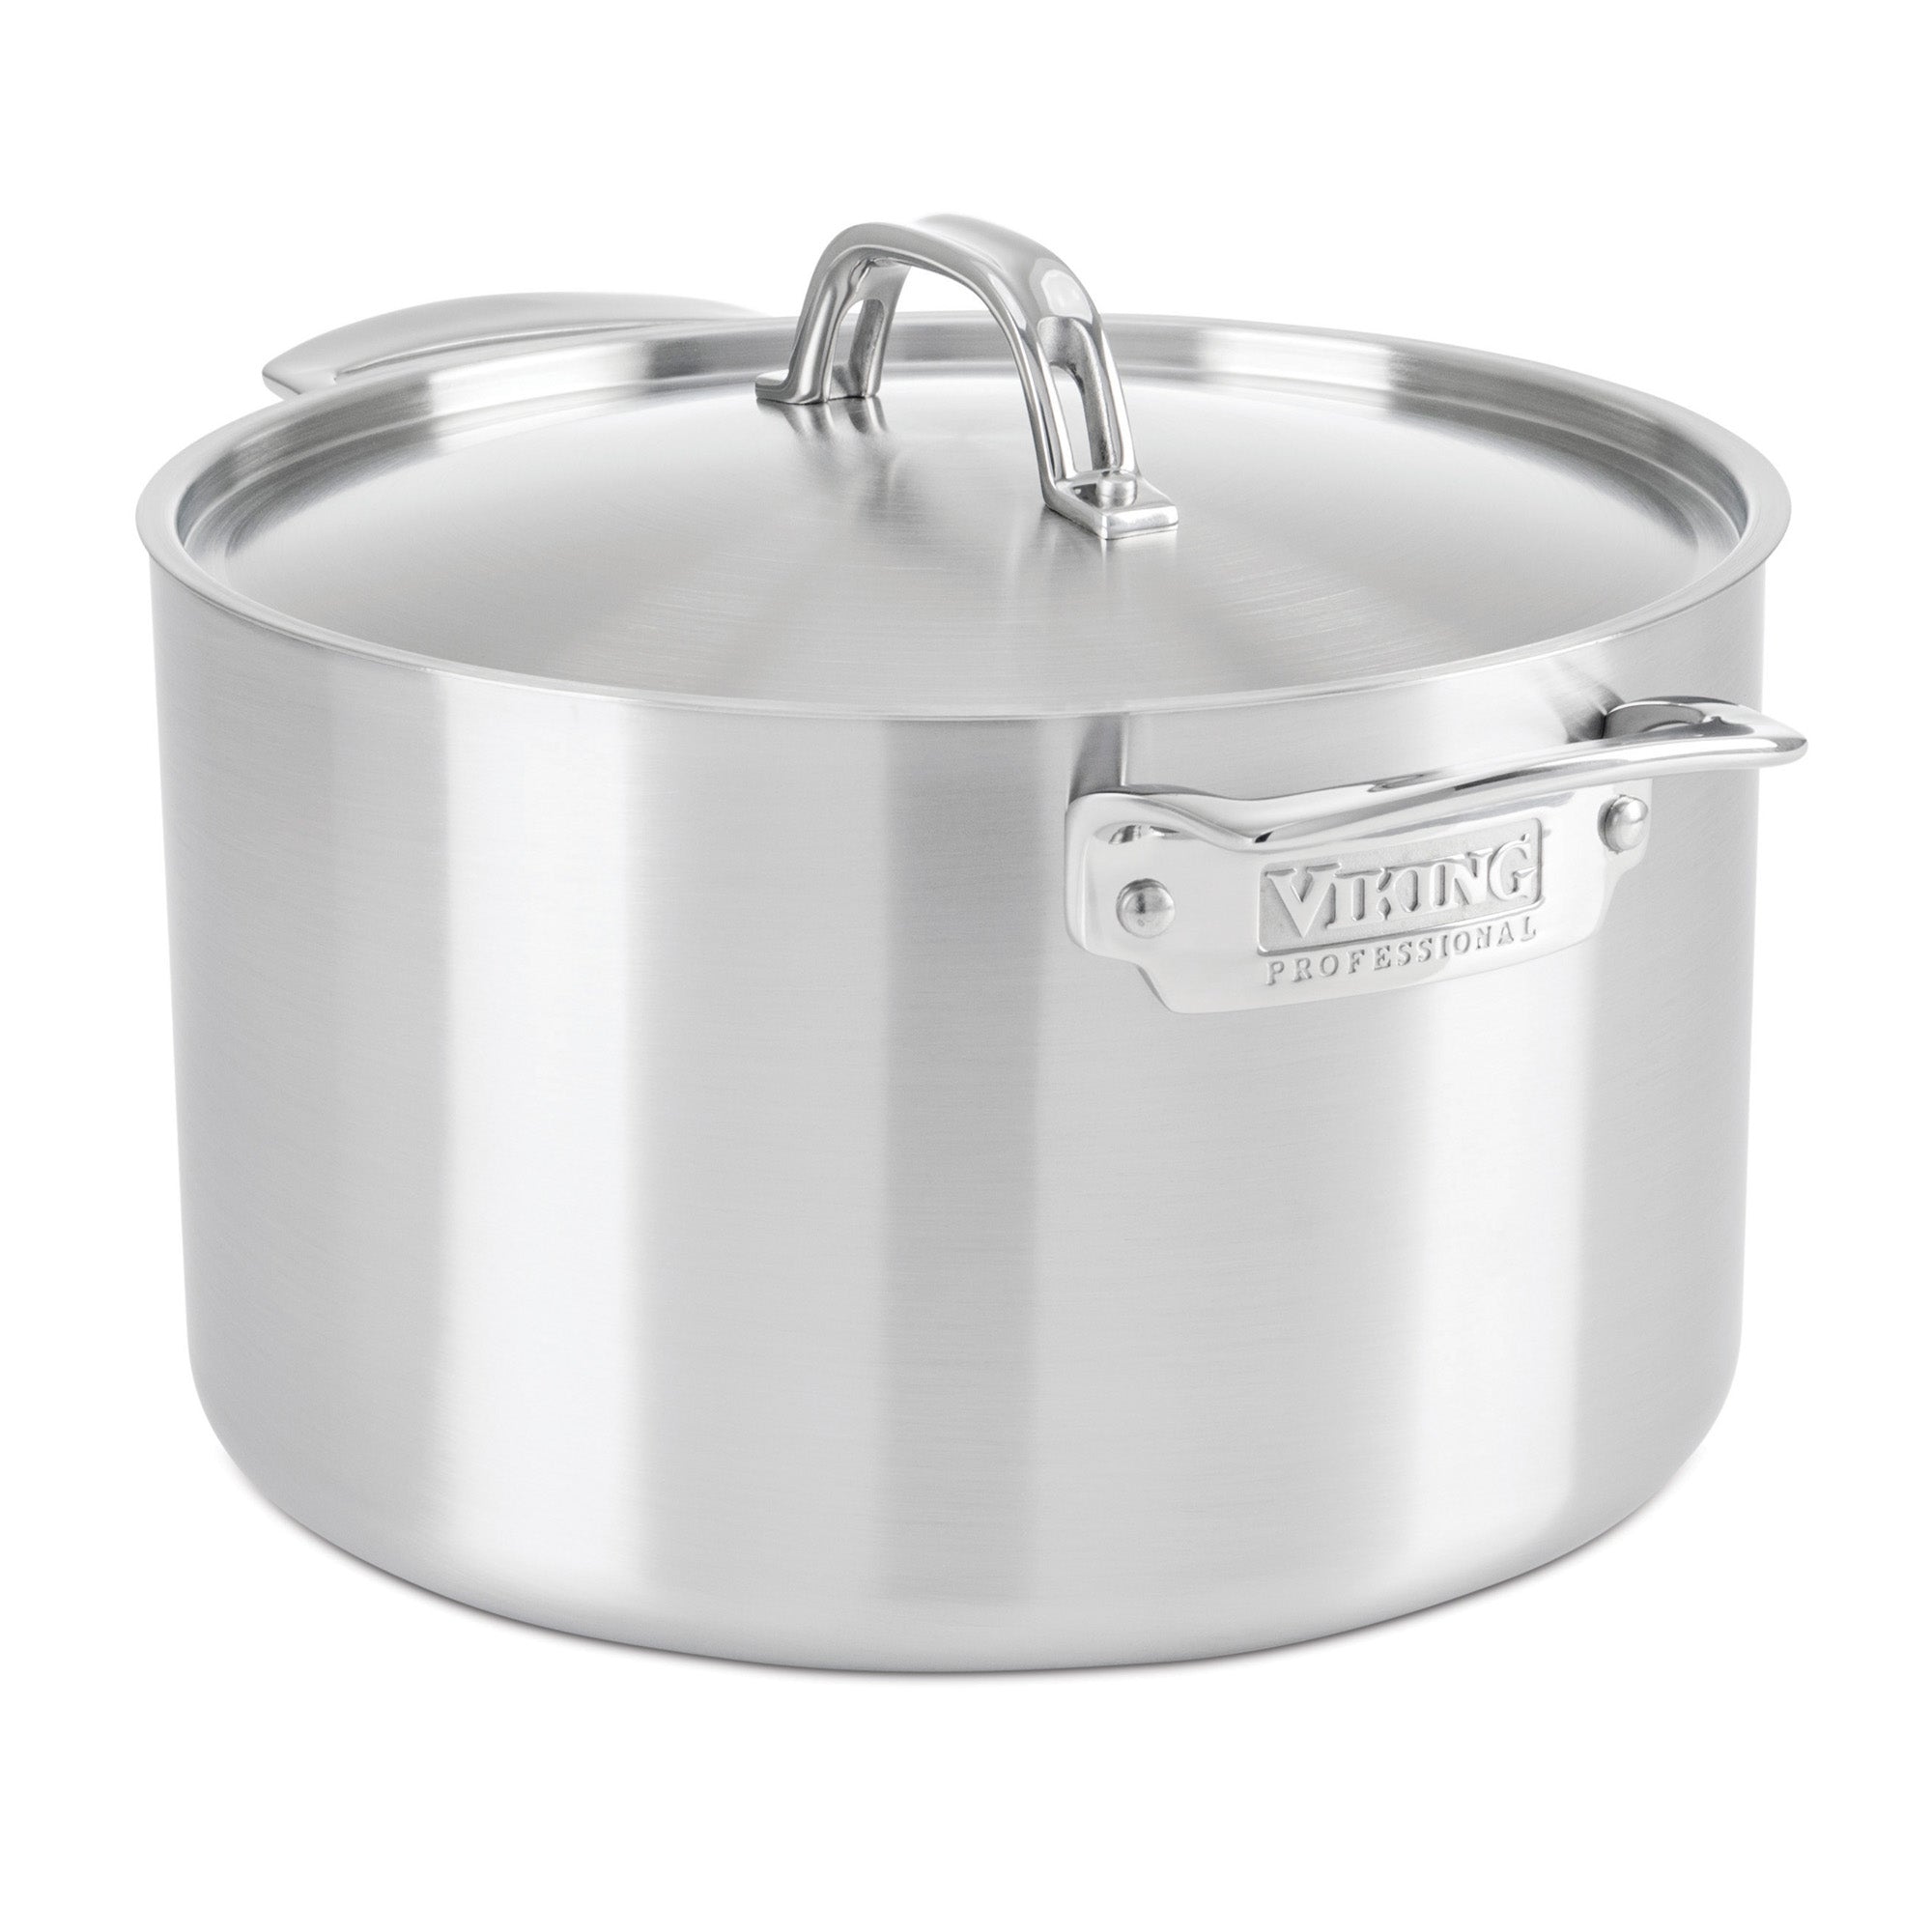 Viking Professional 5-Ply 10-piece Cookware Set